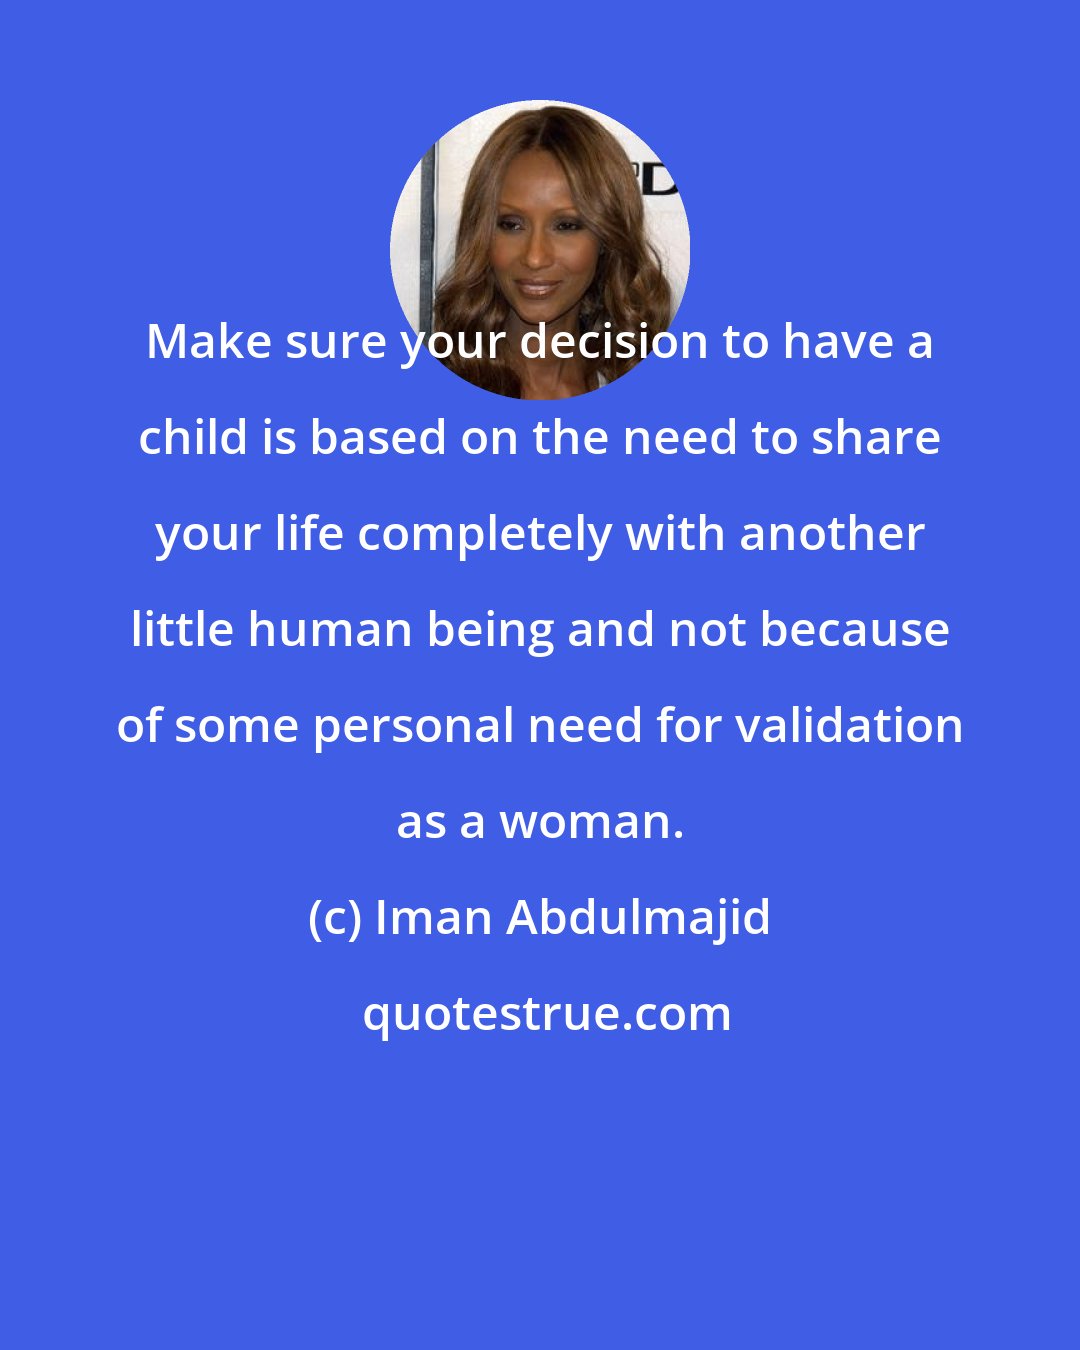 Iman Abdulmajid: Make sure your decision to have a child is based on the need to share your life completely with another little human being and not because of some personal need for validation as a woman.